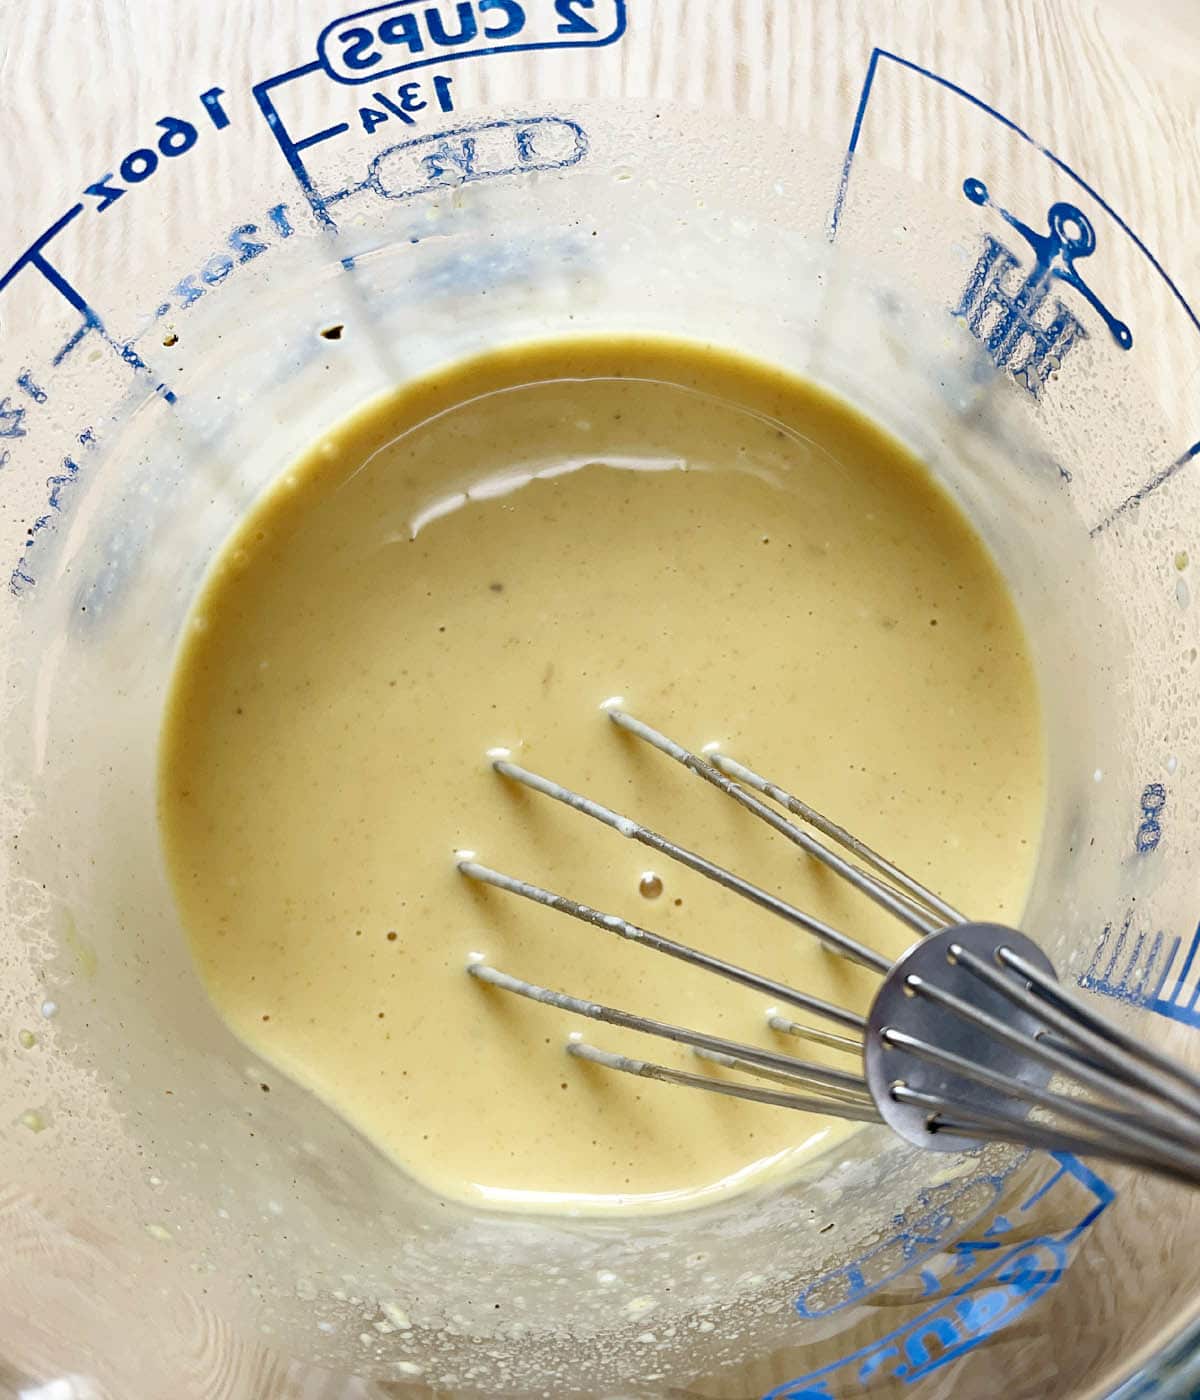 A glass measuring cup containing a whisk set in yellow honey mustard dressing.